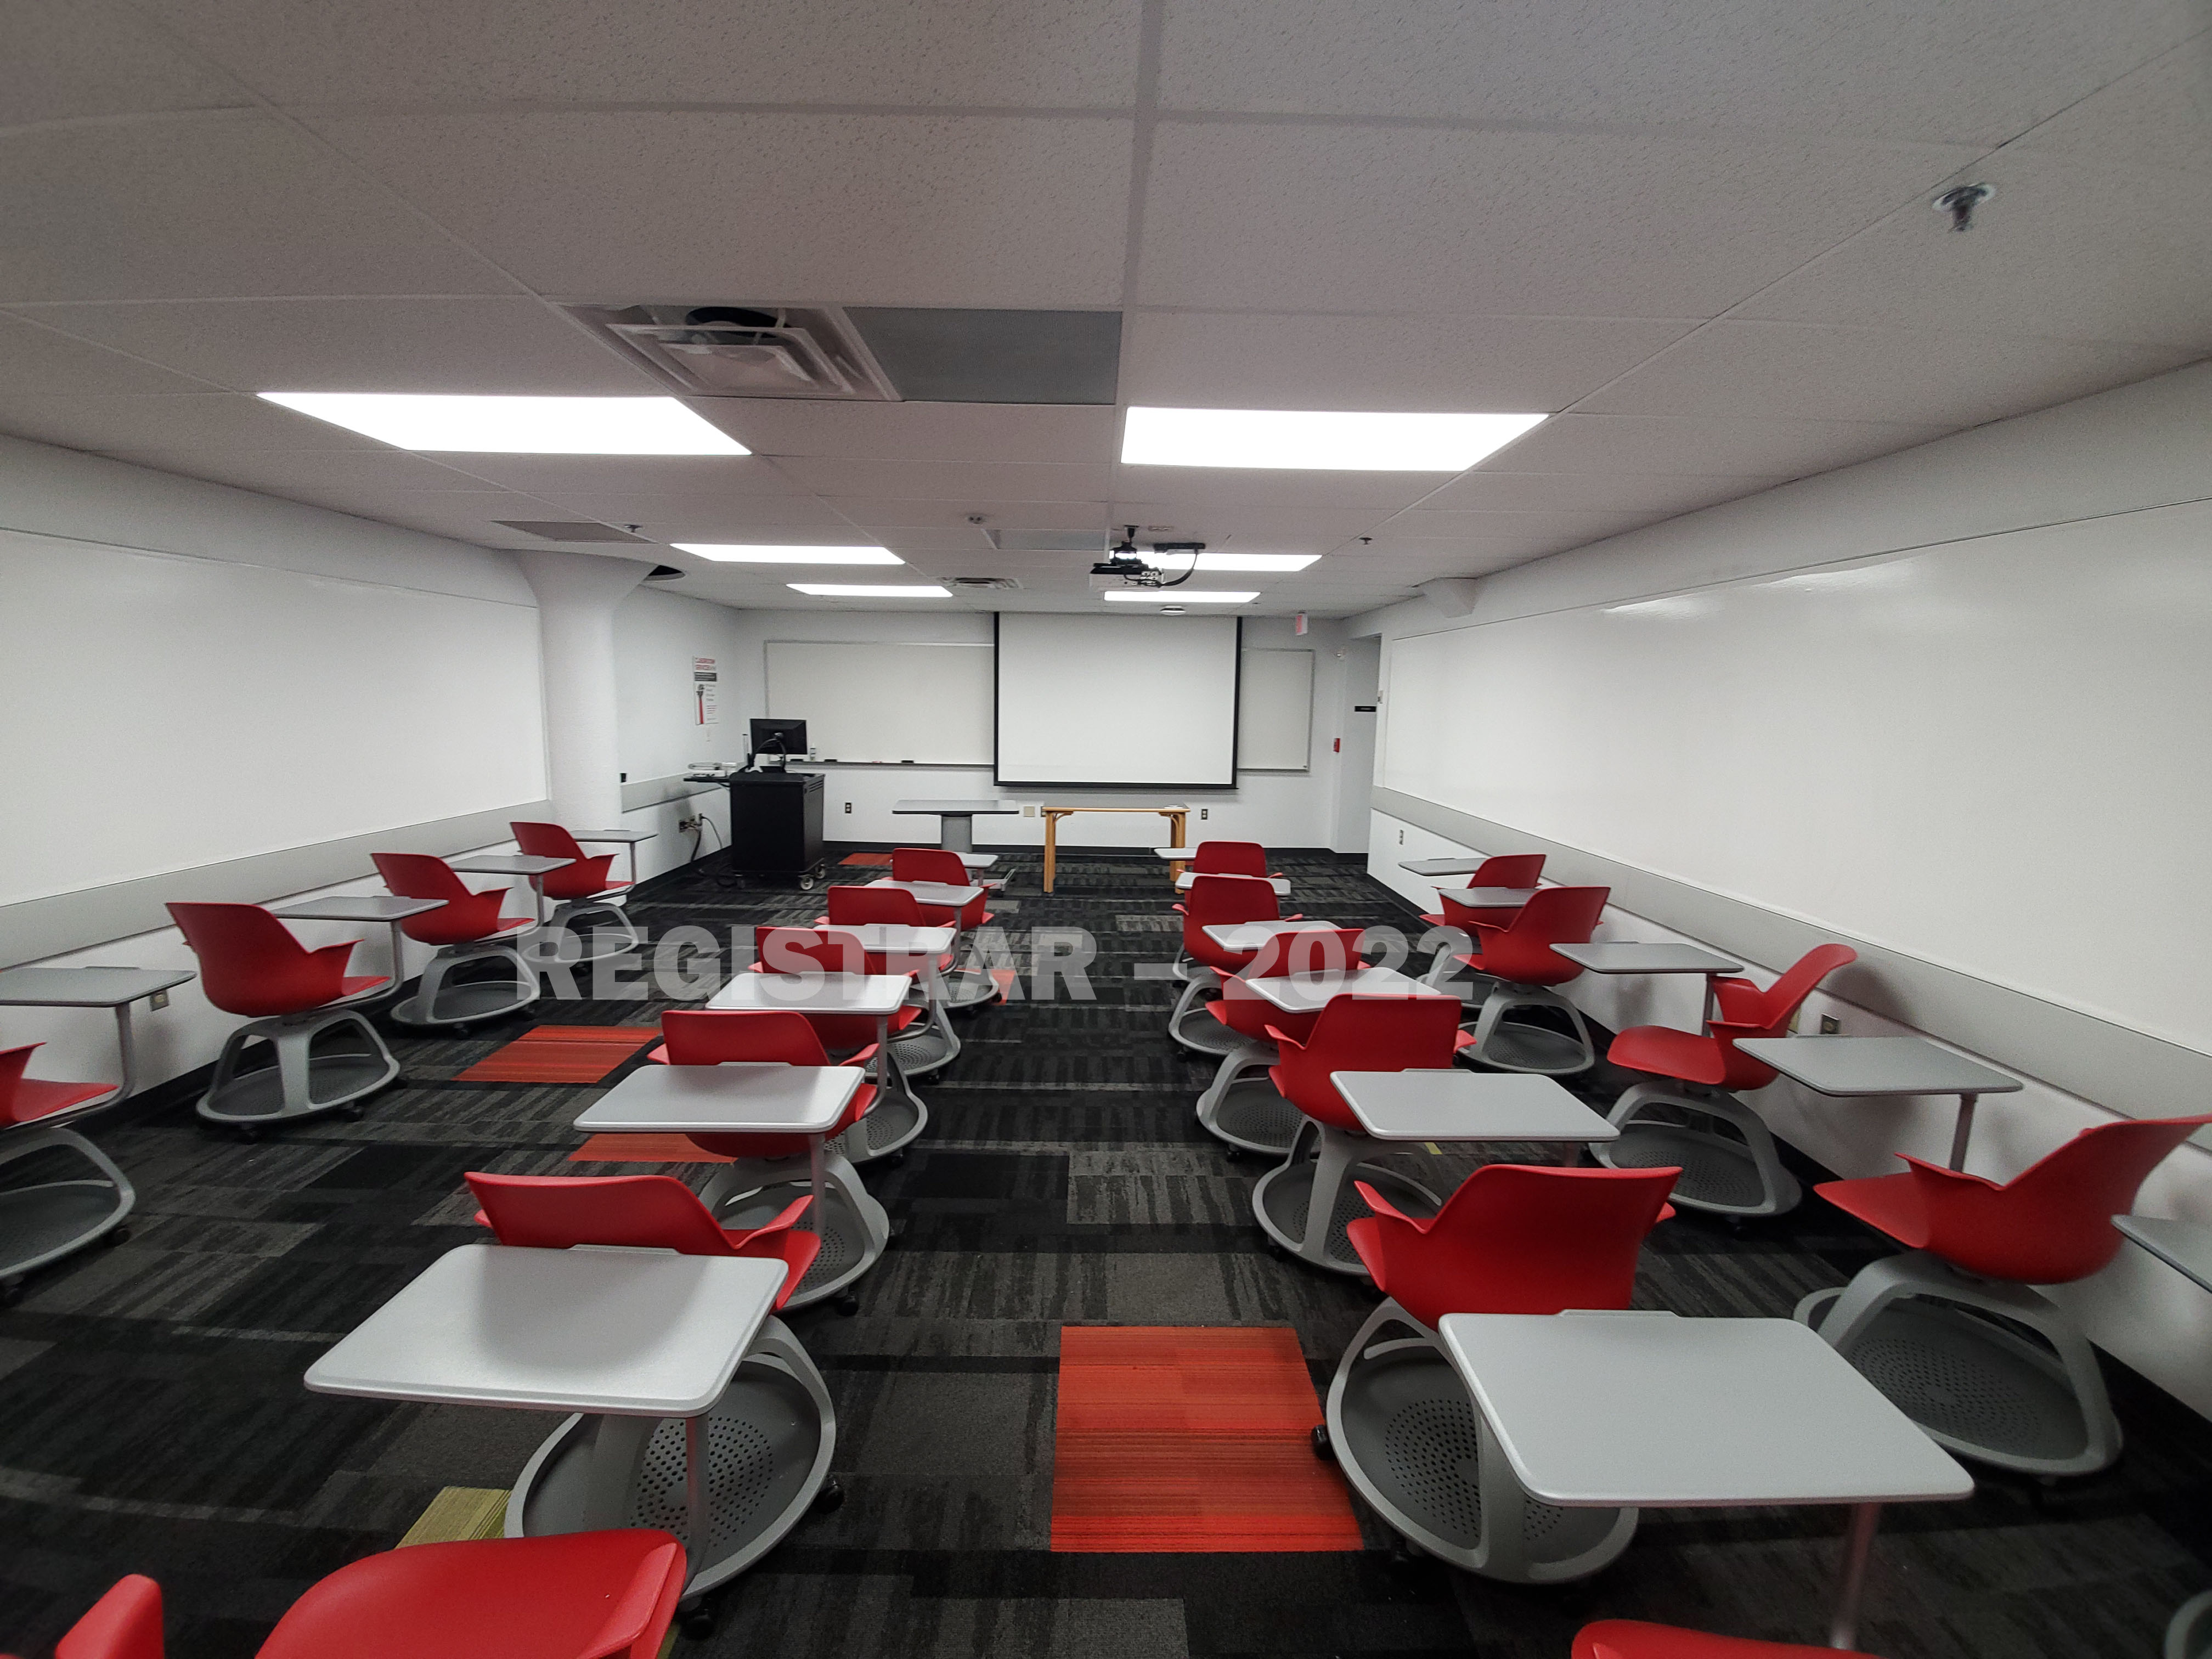 Enarson Classroom Building room 17 ultra wide angle view from the back of the room with projector screen down